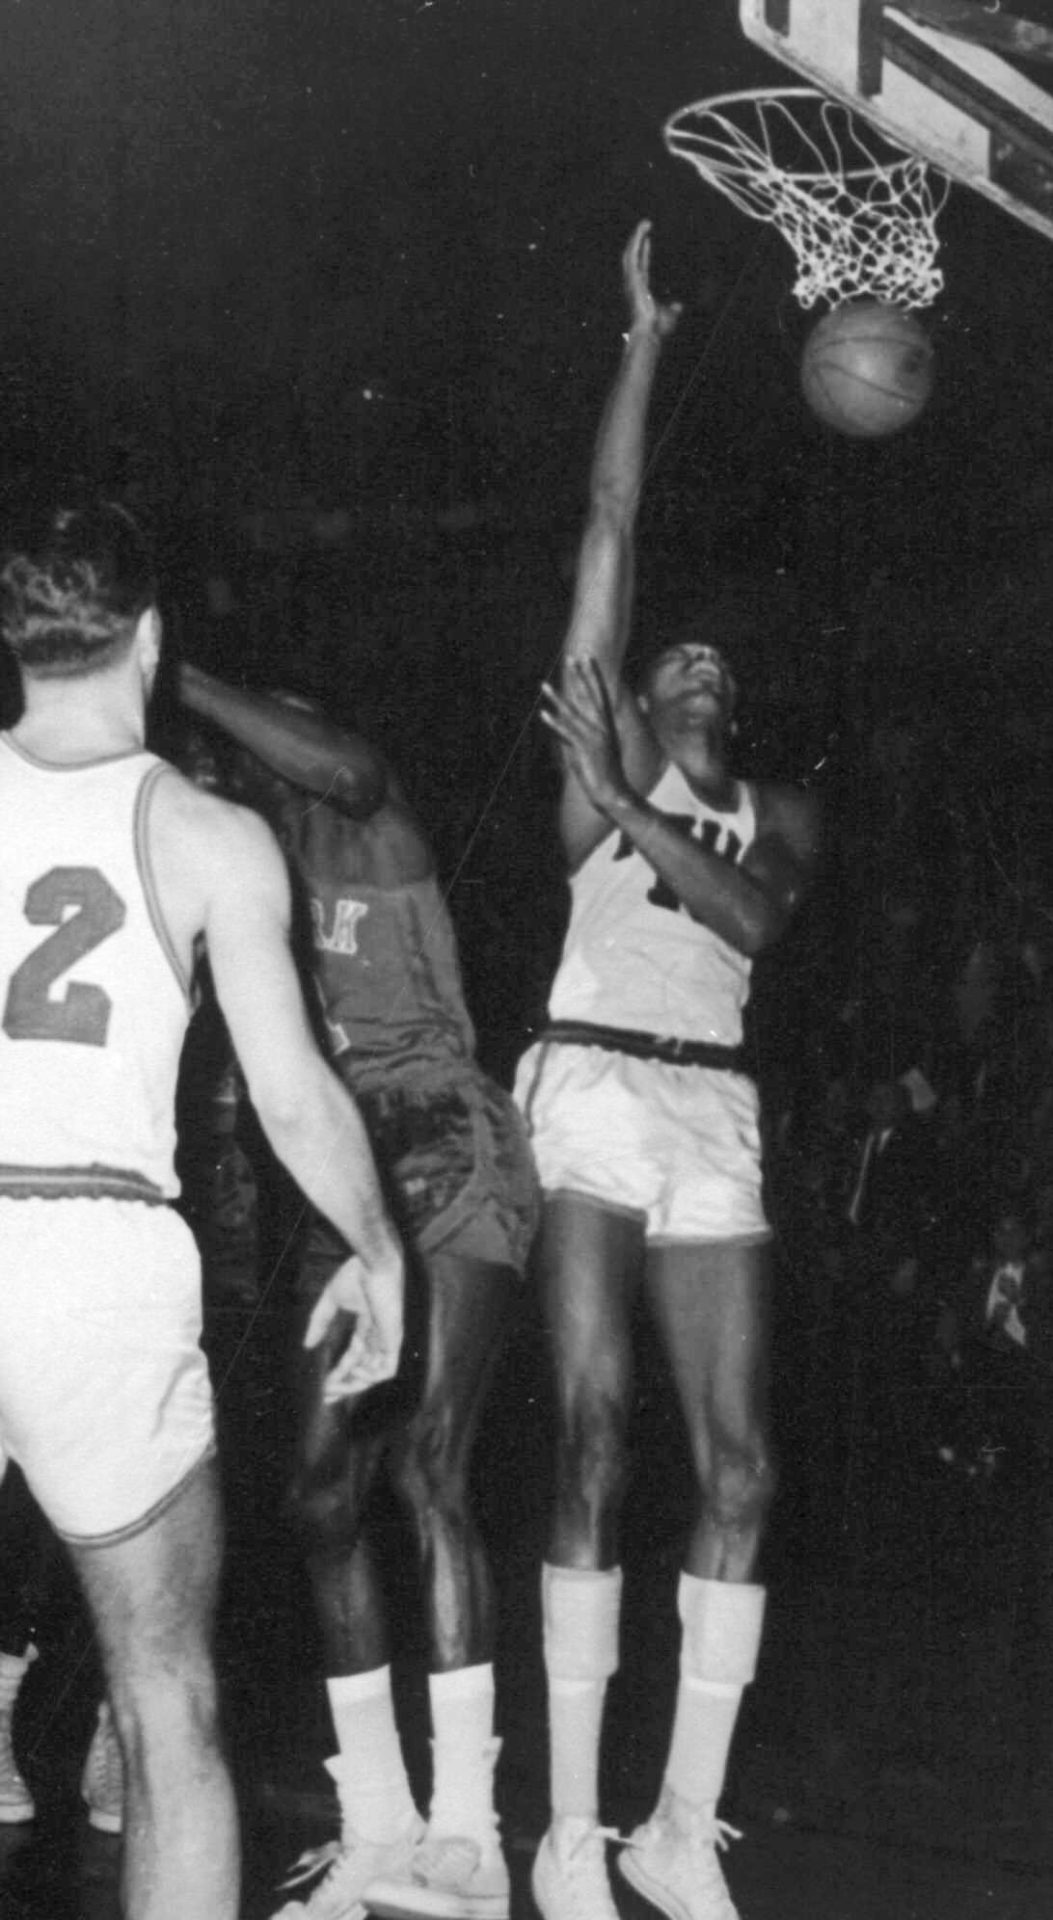 Philadelphia Warriors' Wilt Chamberlain, right, scores his 100th point, setting an NBA record, during a game against the New York Knicks in Hershey, Pa., March 2, 1962.